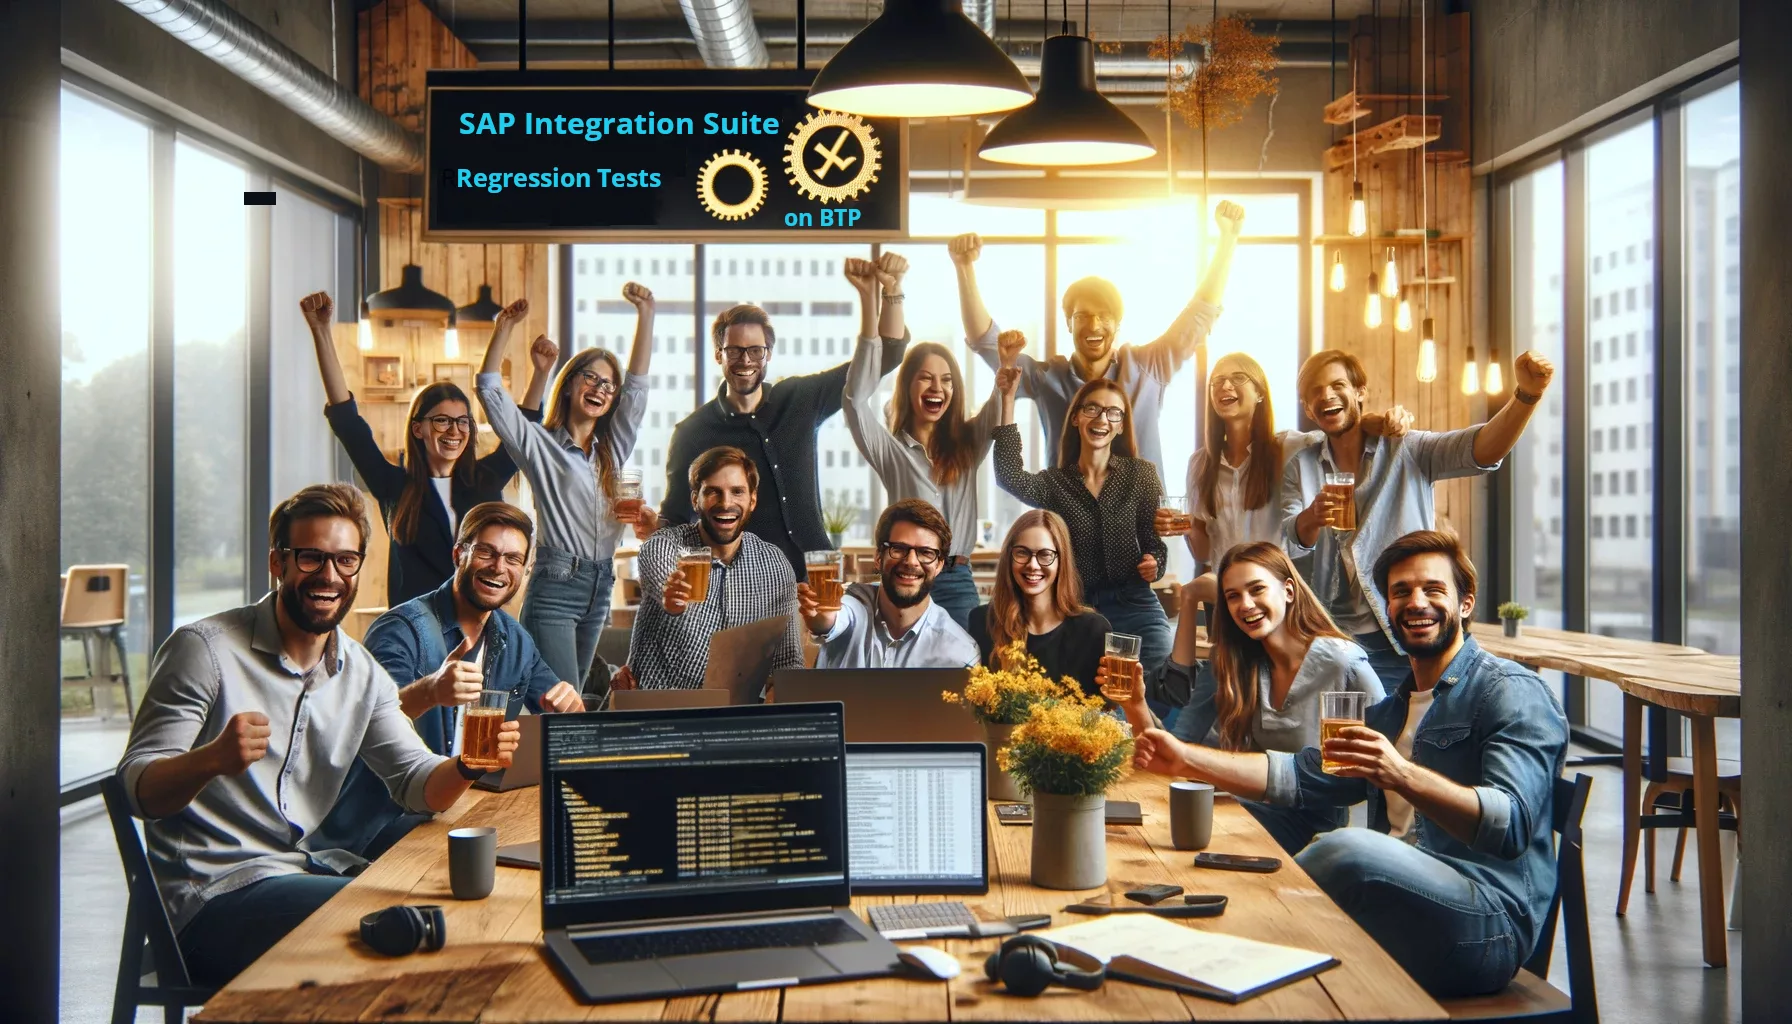 A Successful POC for Regression Testing on SAP Integration Suite